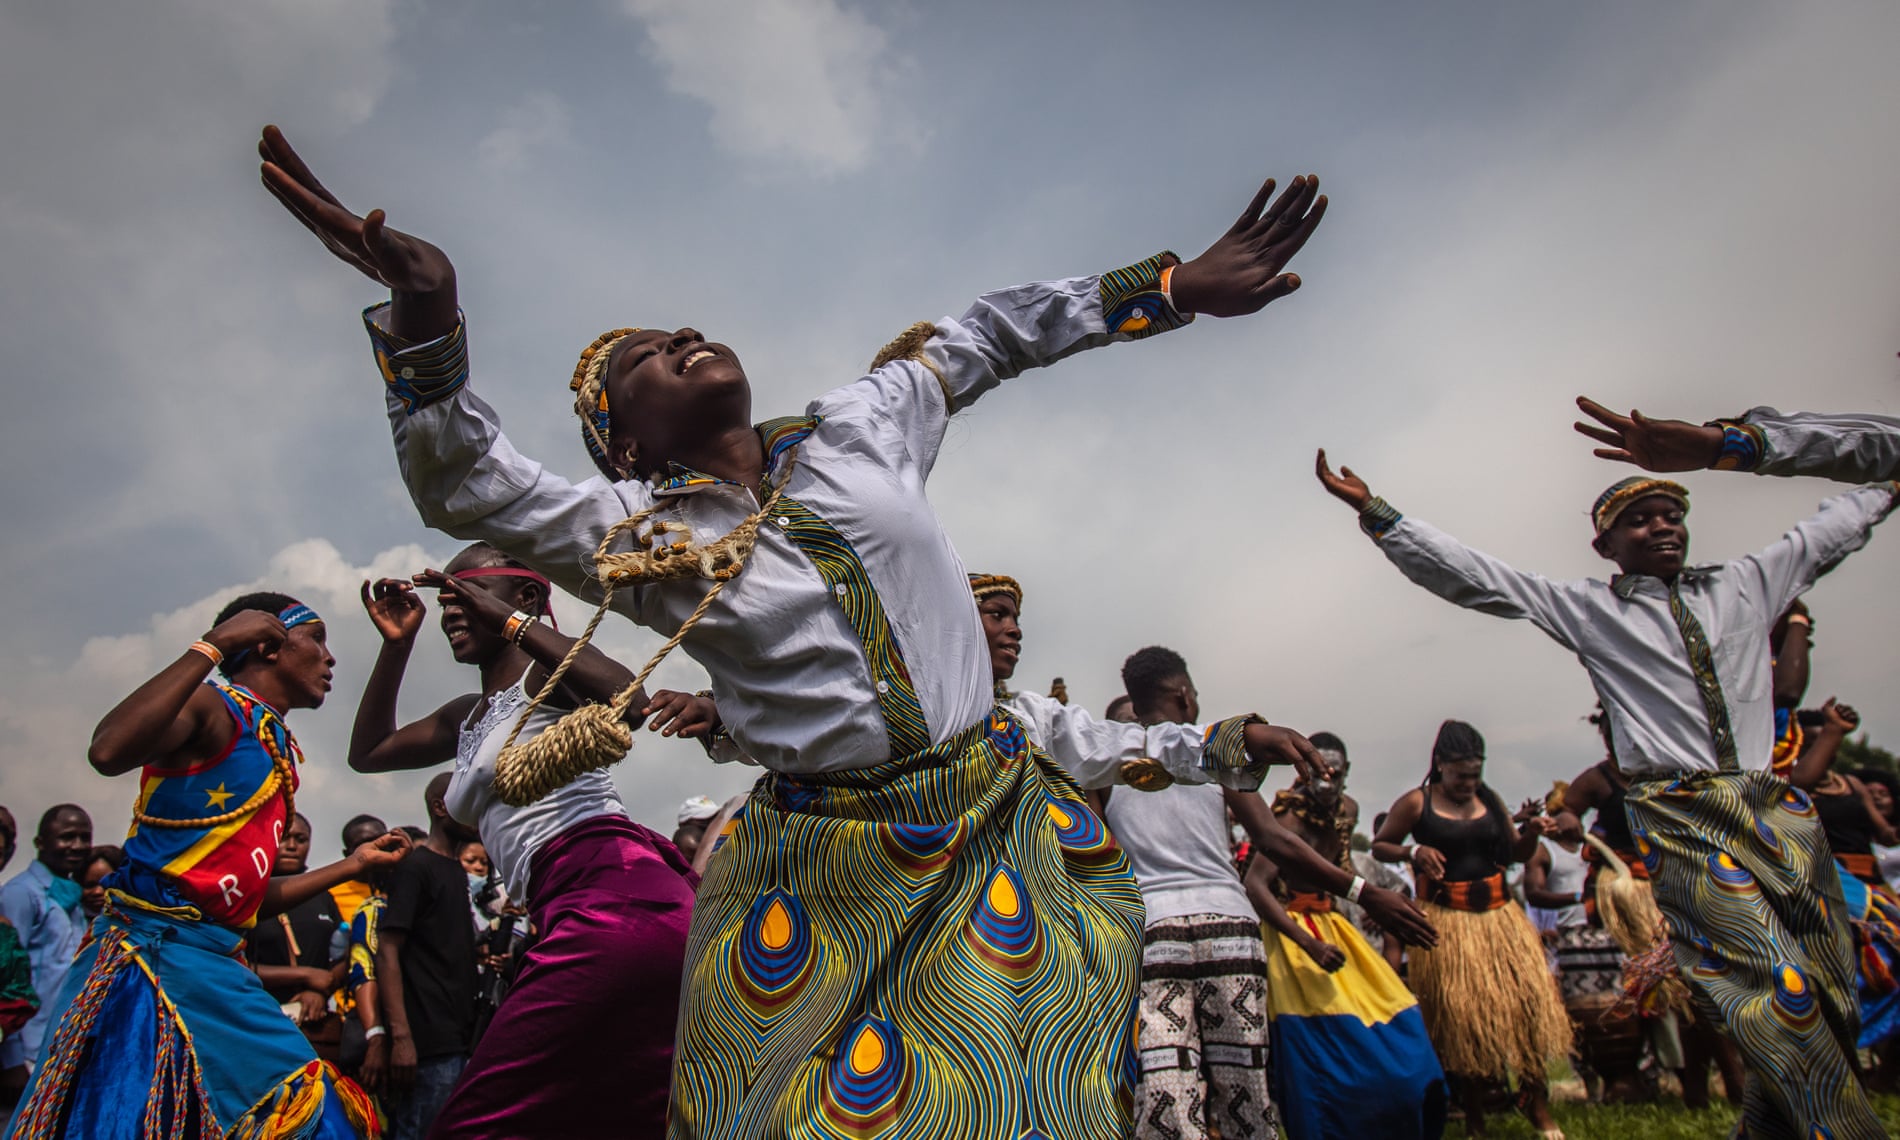 ‘The joy of being together’: Congo’s first major festival since the pandemic – in pictures